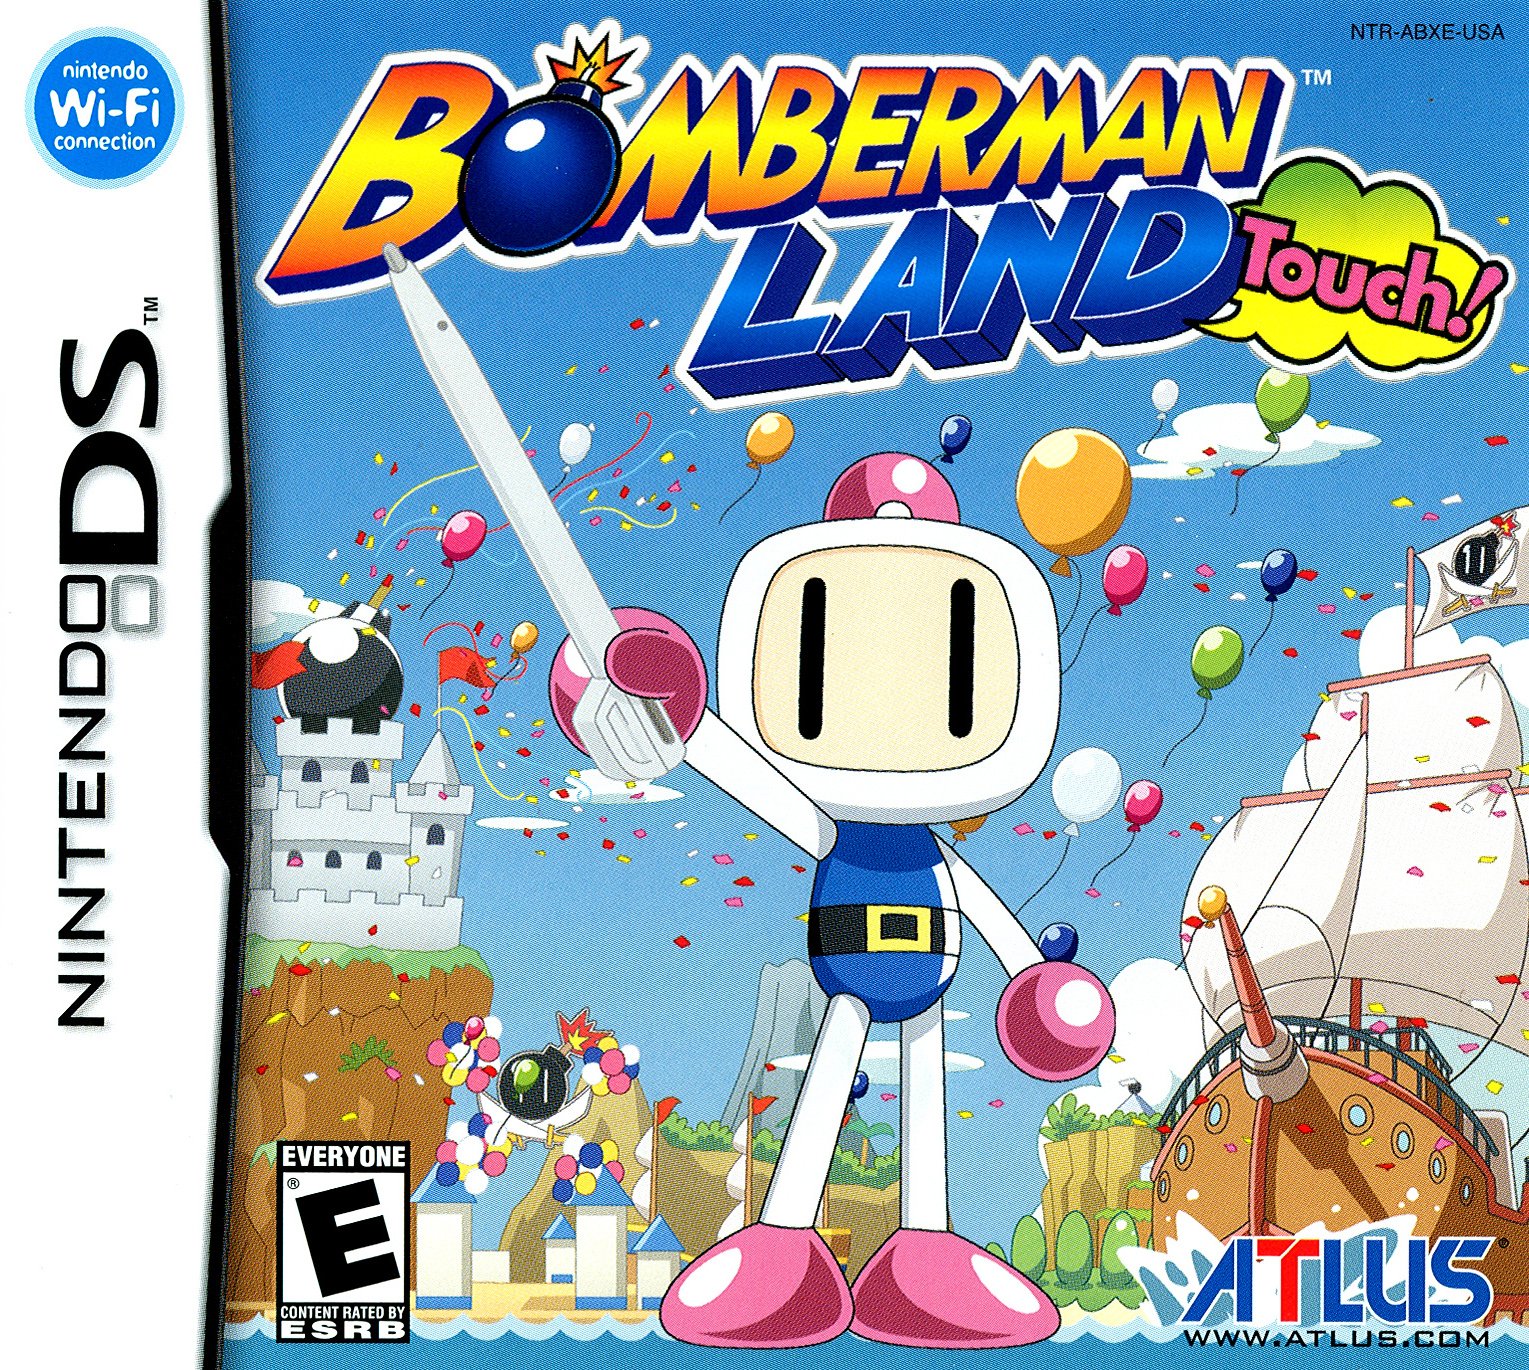 Image of Bomberman Land Touch!